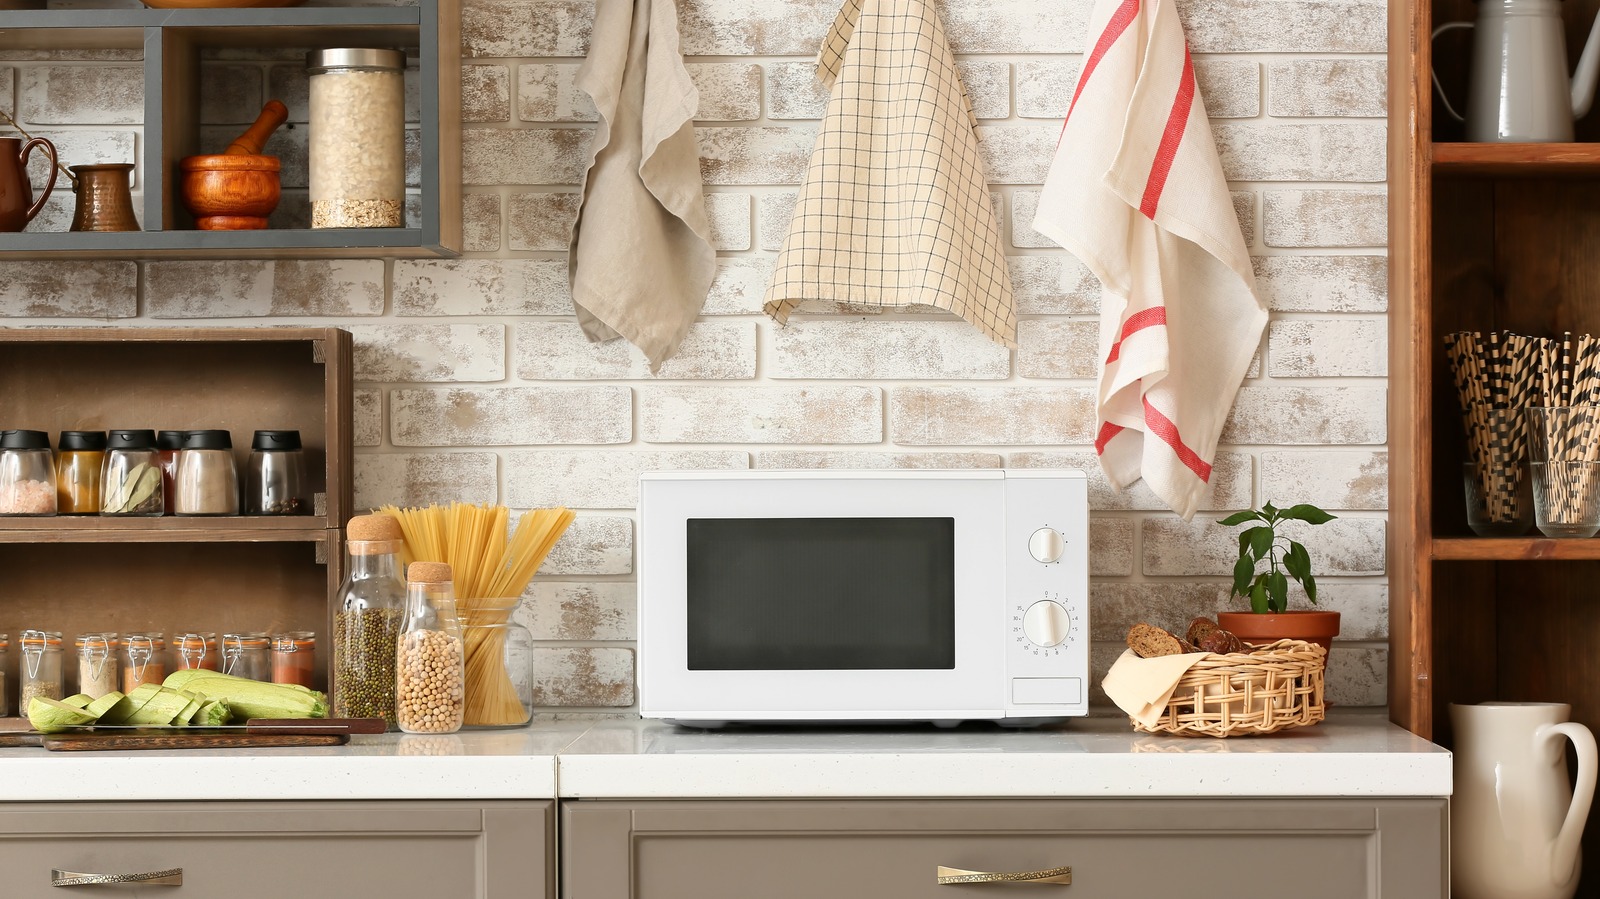 https://www.housedigest.com/img/gallery/the-right-place-to-put-your-microwave/l-intro-1665173809.jpg